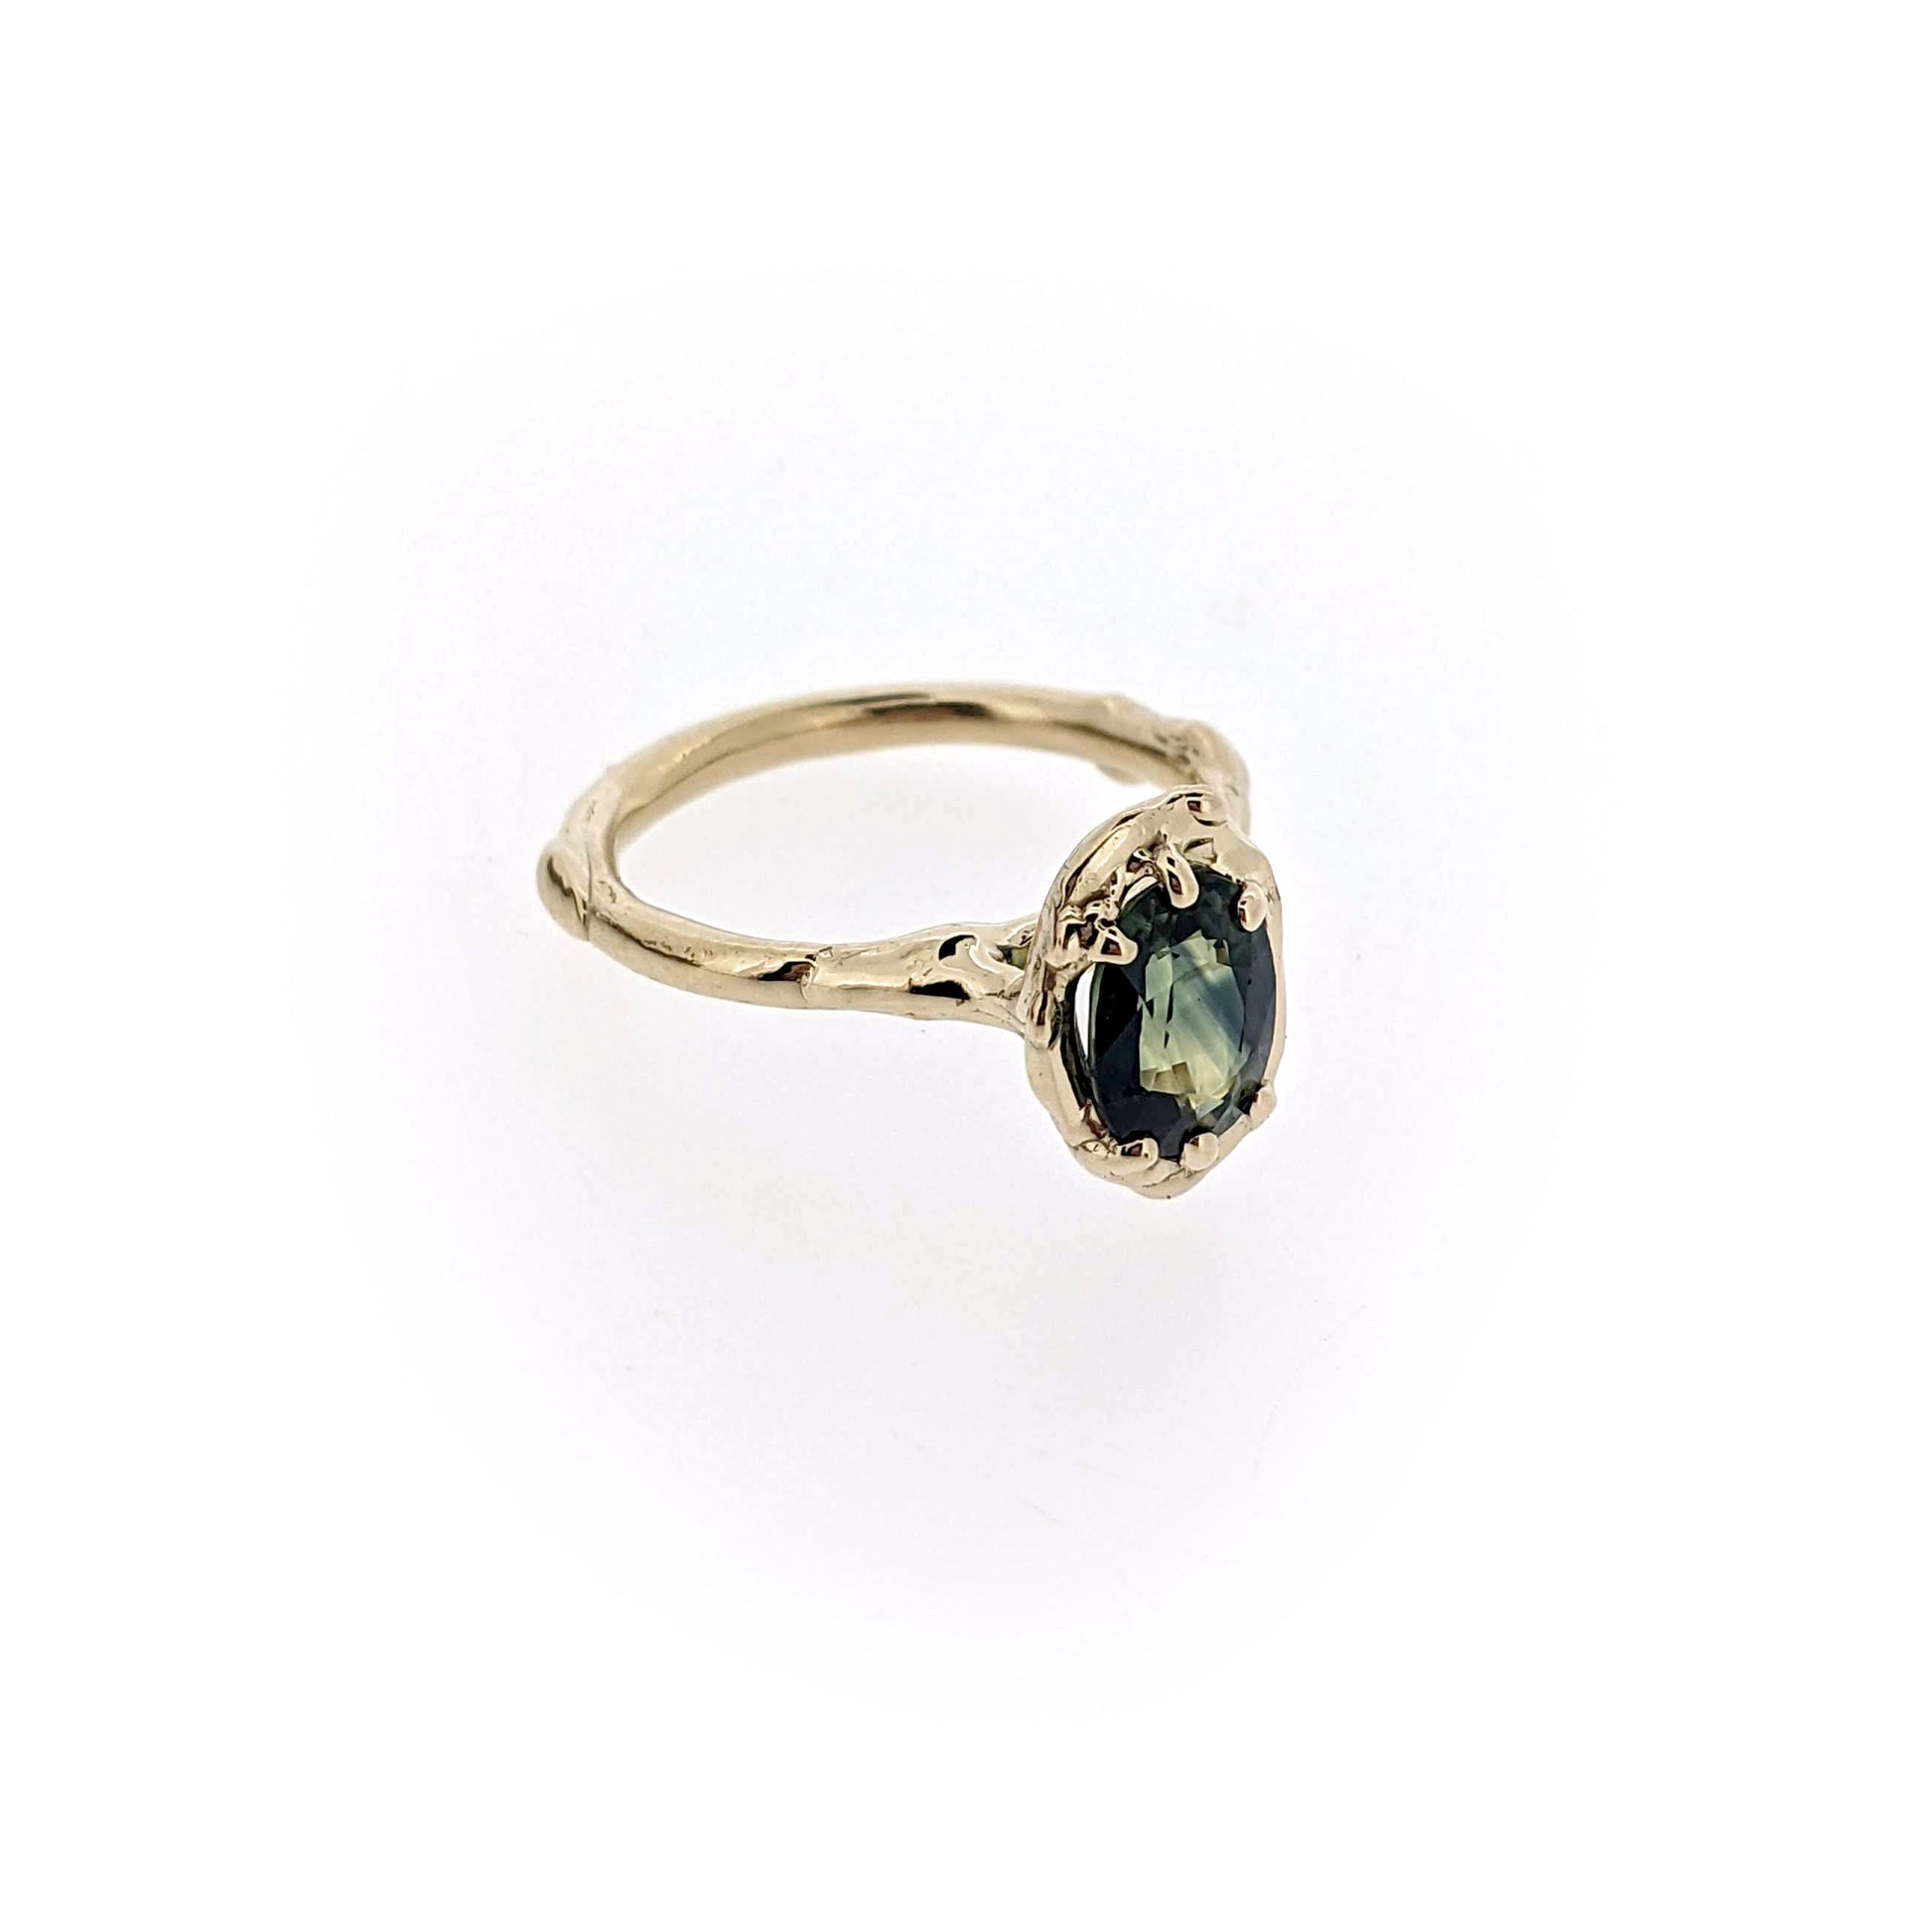 Angled view of Rianna Ring. Rianna features a sweet 1.65 Carat VVS multi-color Sapphire from Austrailia is nestled in an organic recycled 14K yellow gold setting.  This sapphire is stunning -- and reflects a blend of blues, greens, and yellows depending on how the light passes through.  